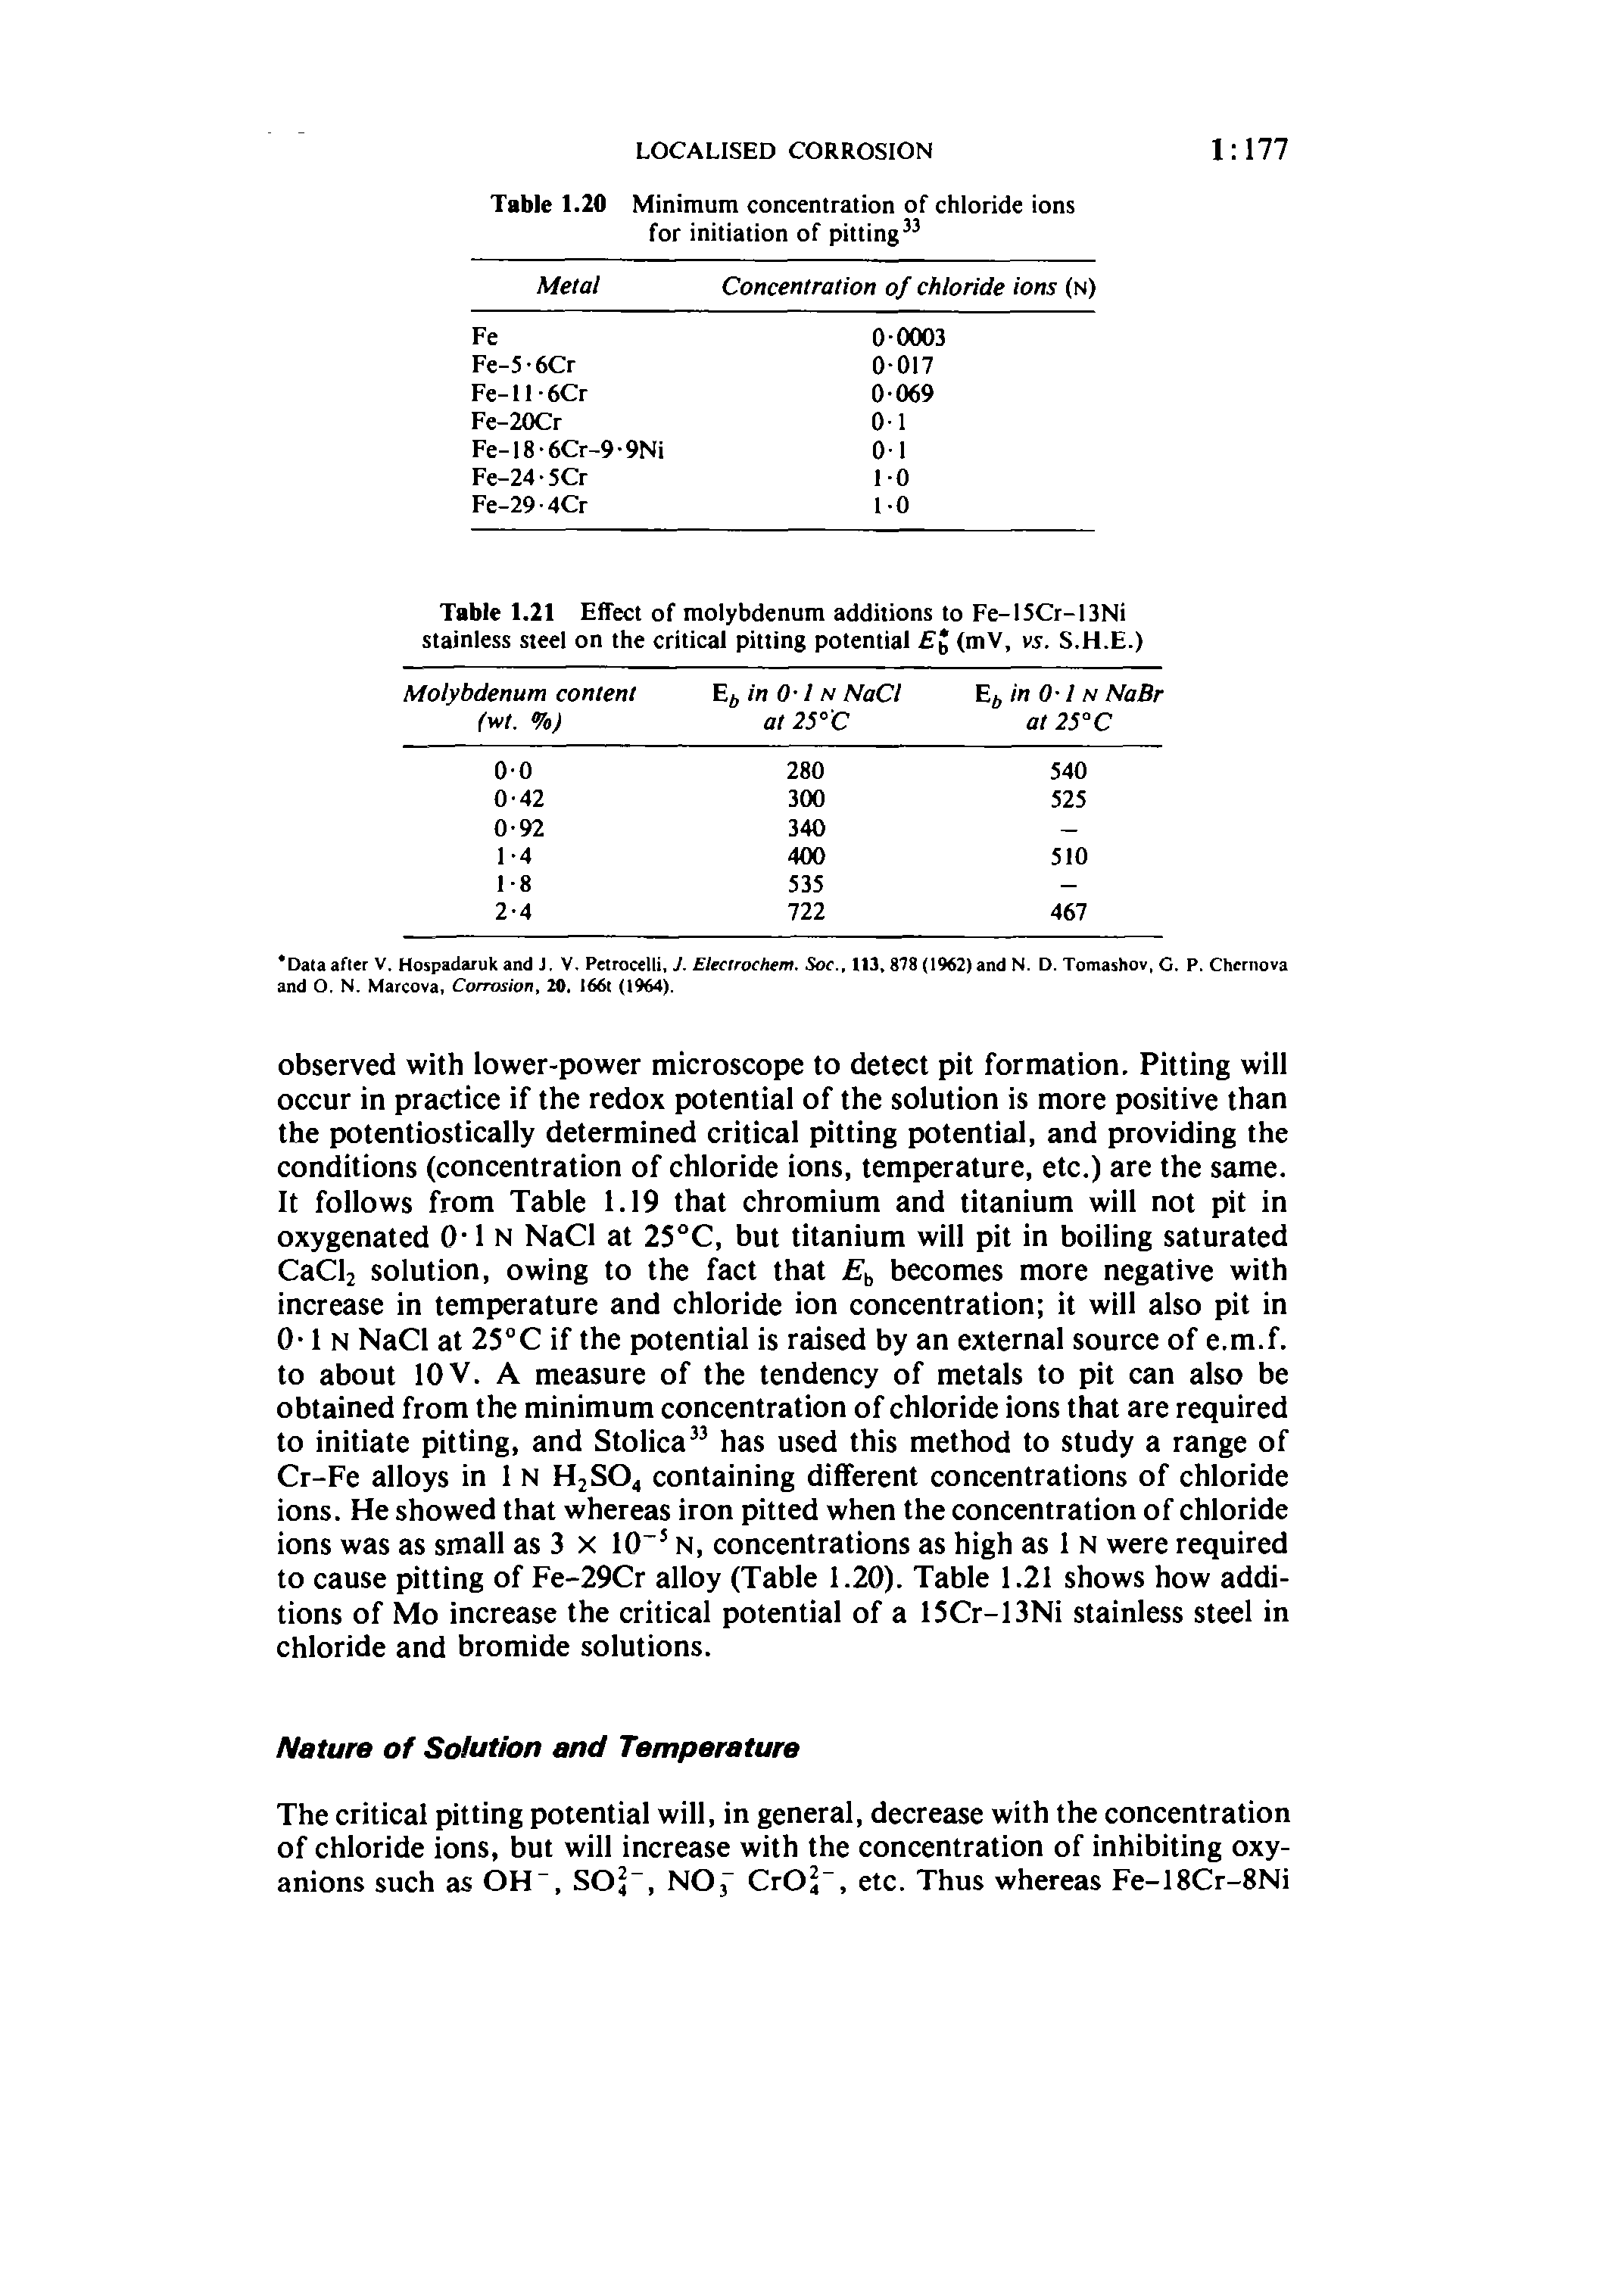 Table 1.21 Effect of molybdenum additions to Fe-15Cr-13Ni stainless steel on the critical pitting potential J S.H.E.)...